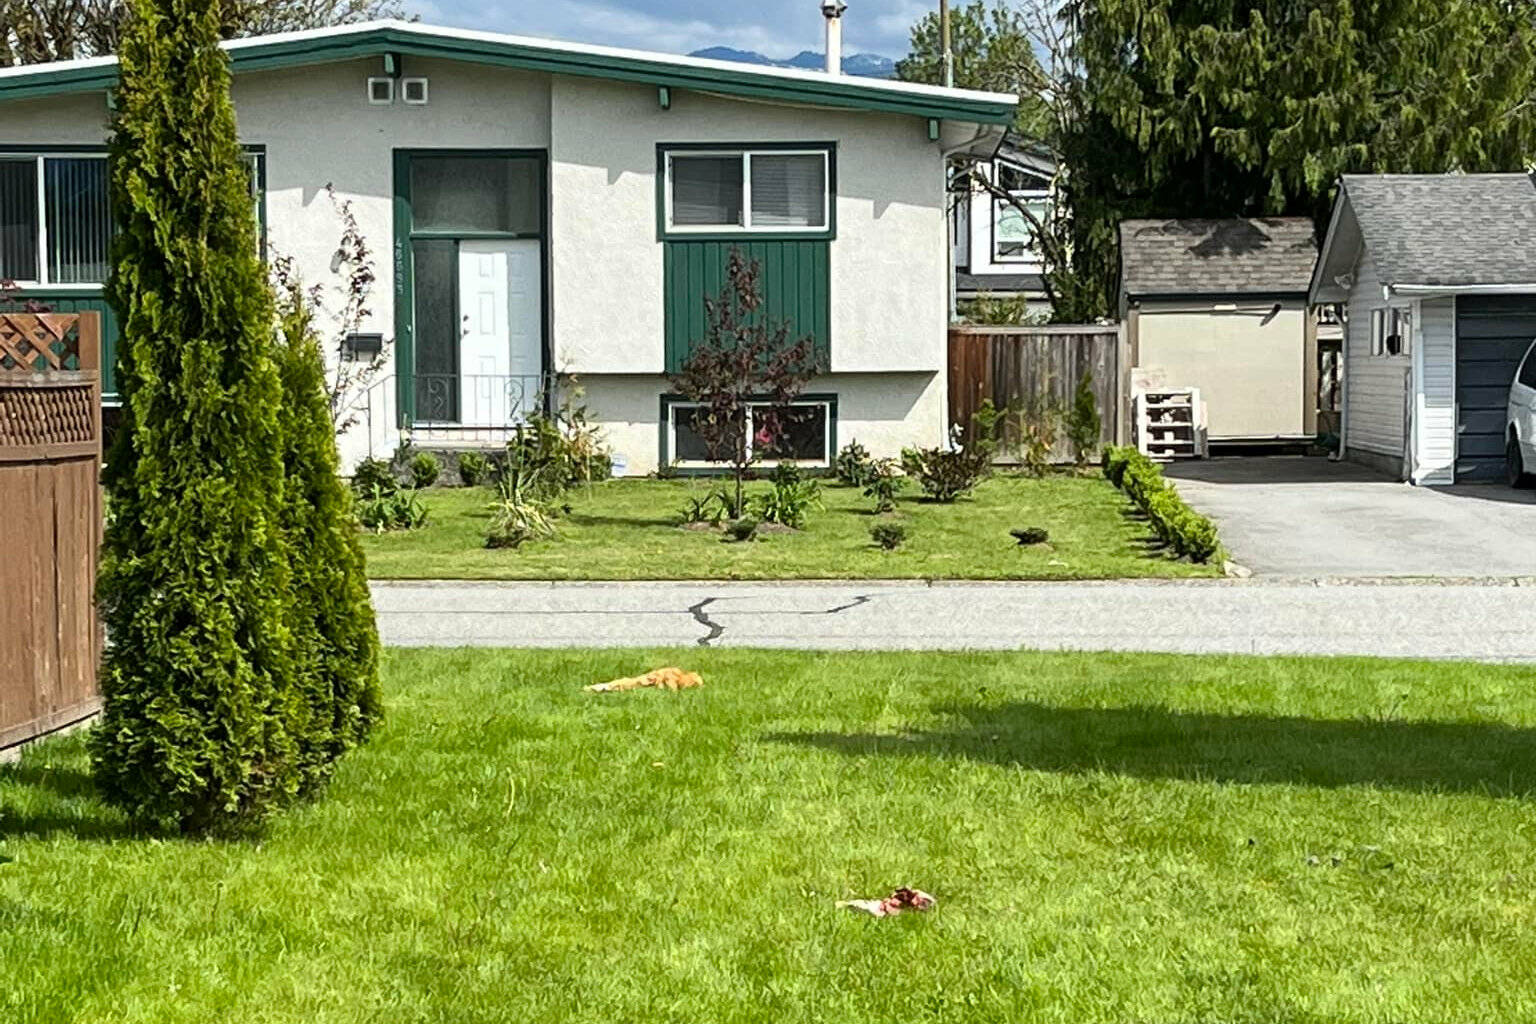 Two dead cats on a lawn of a house on Fairfield Island in Chilliwack posted on a Facebook group on Monday, May 8, 2023. (Meghan Bee Facebook photo)